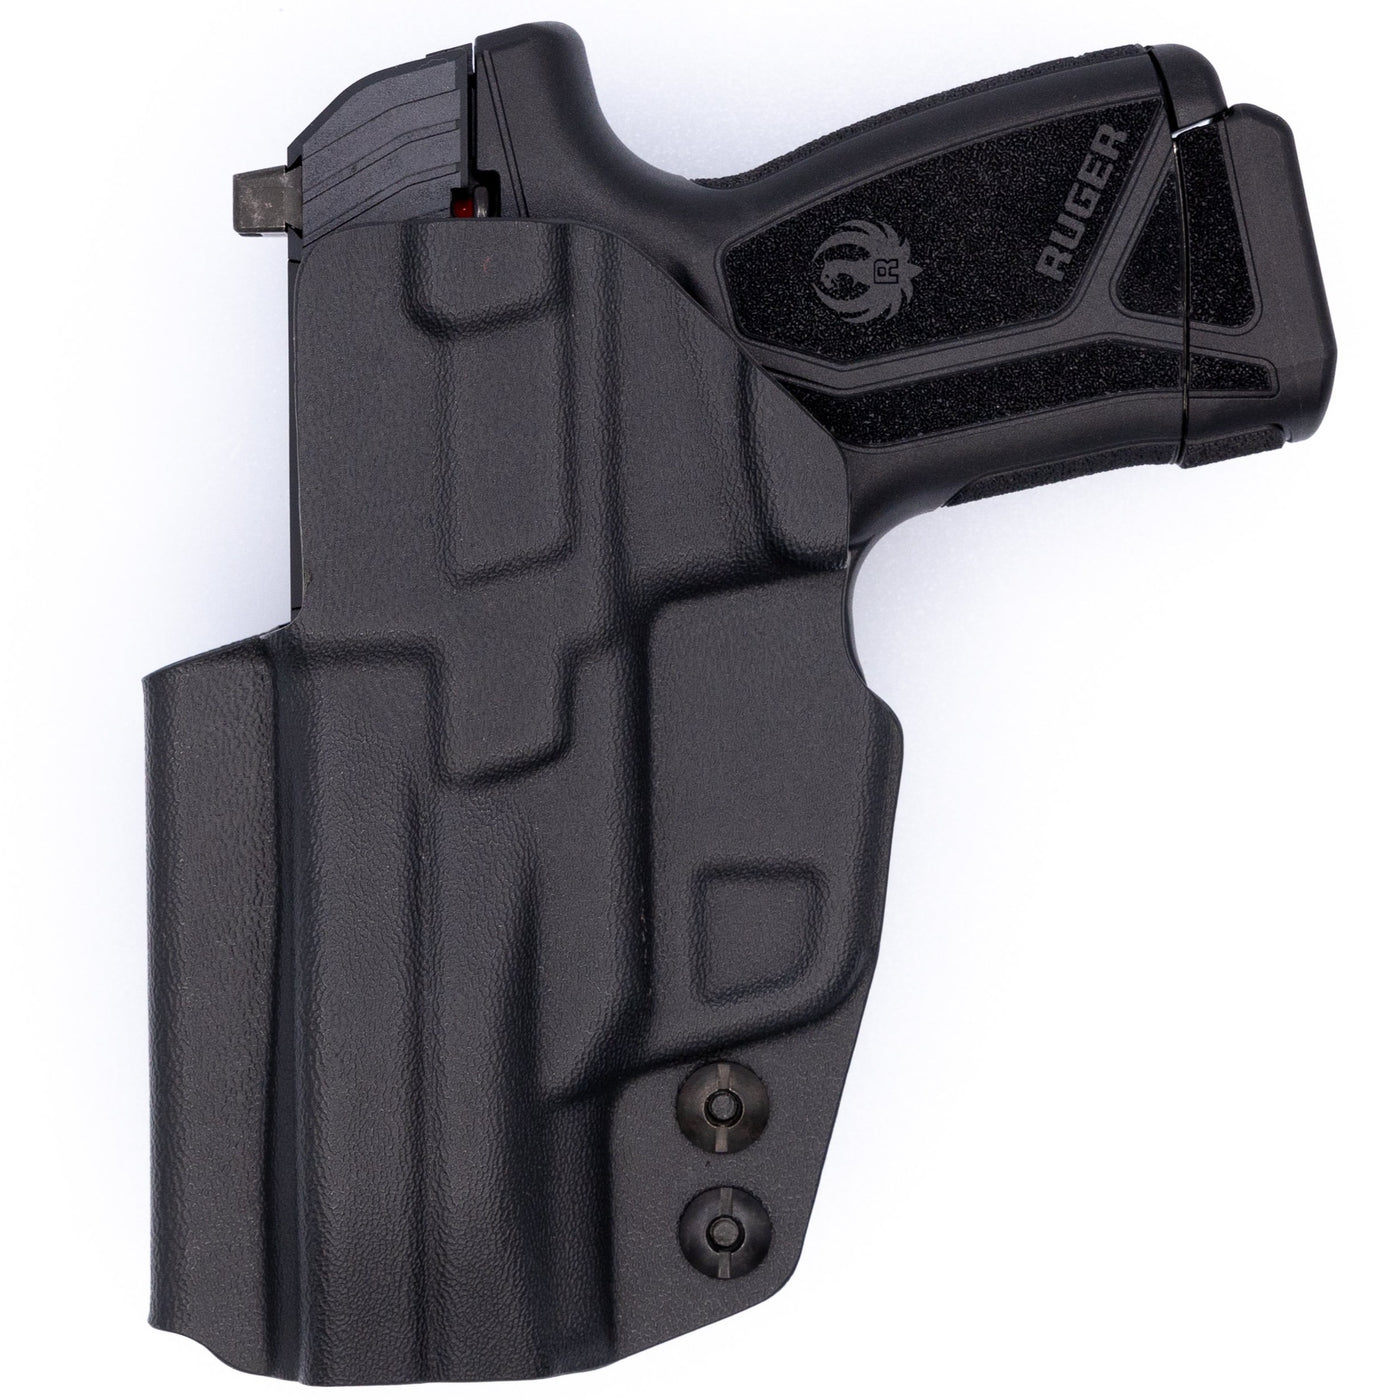 Shown is the quickship C&G Holsters IWB inside the waistband Holster for the Ruger MAX9.